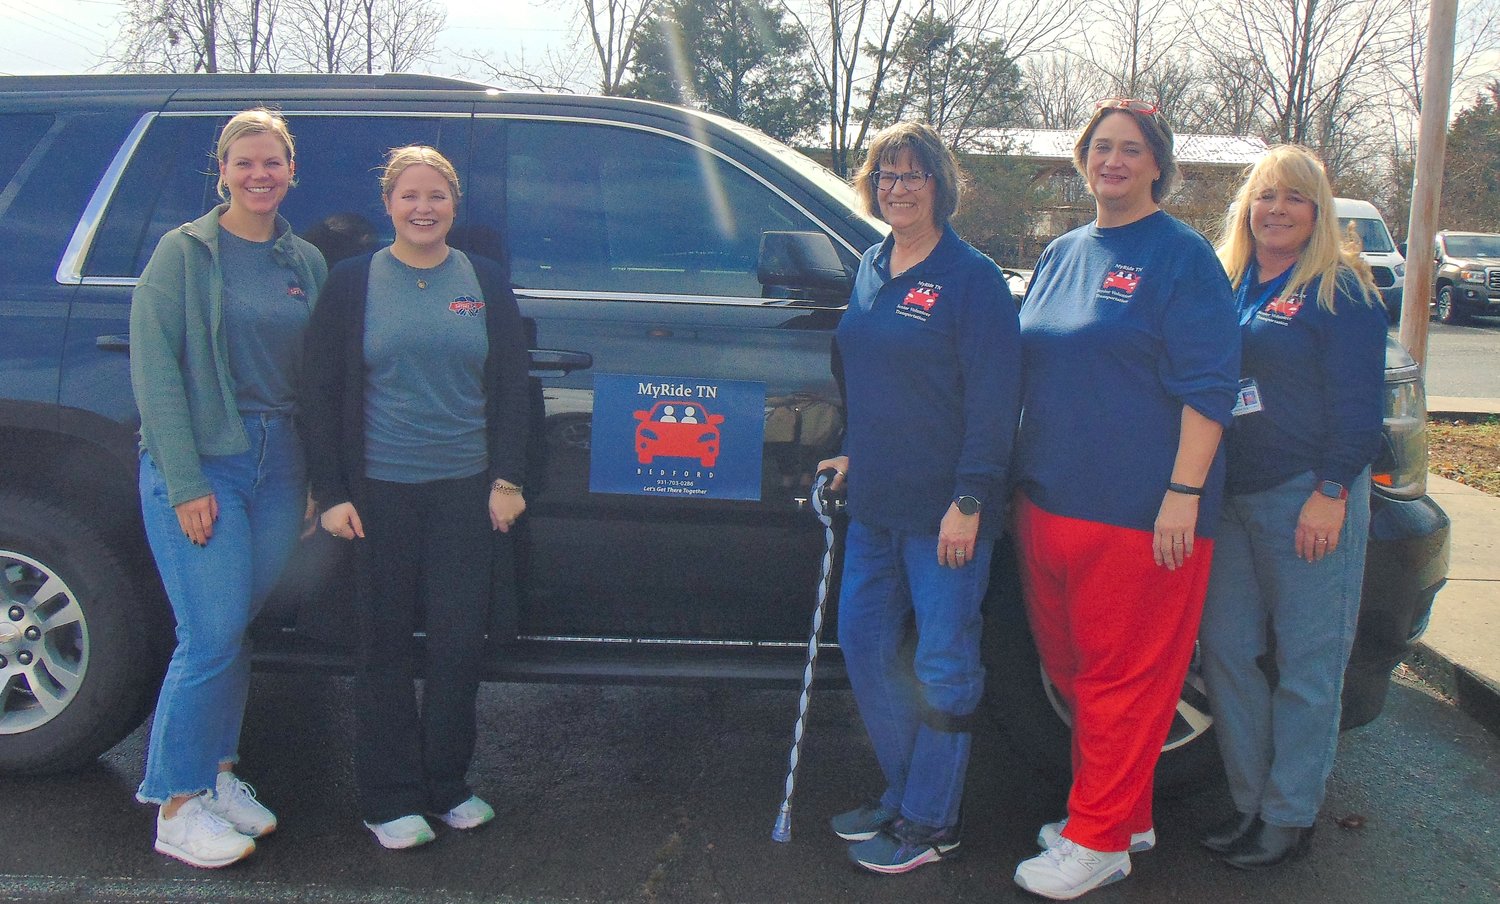 From left, First Lady’s Communications Director Sutherland Shrader, Director of Policy & Special Projects Ella Watkins, MyRide Bedford coordinator Robin Vaickus, Shelbyville Senior Center Director Sonia Miller, and Assistant Director of Aging & Disability Programs Robin Rochelle.